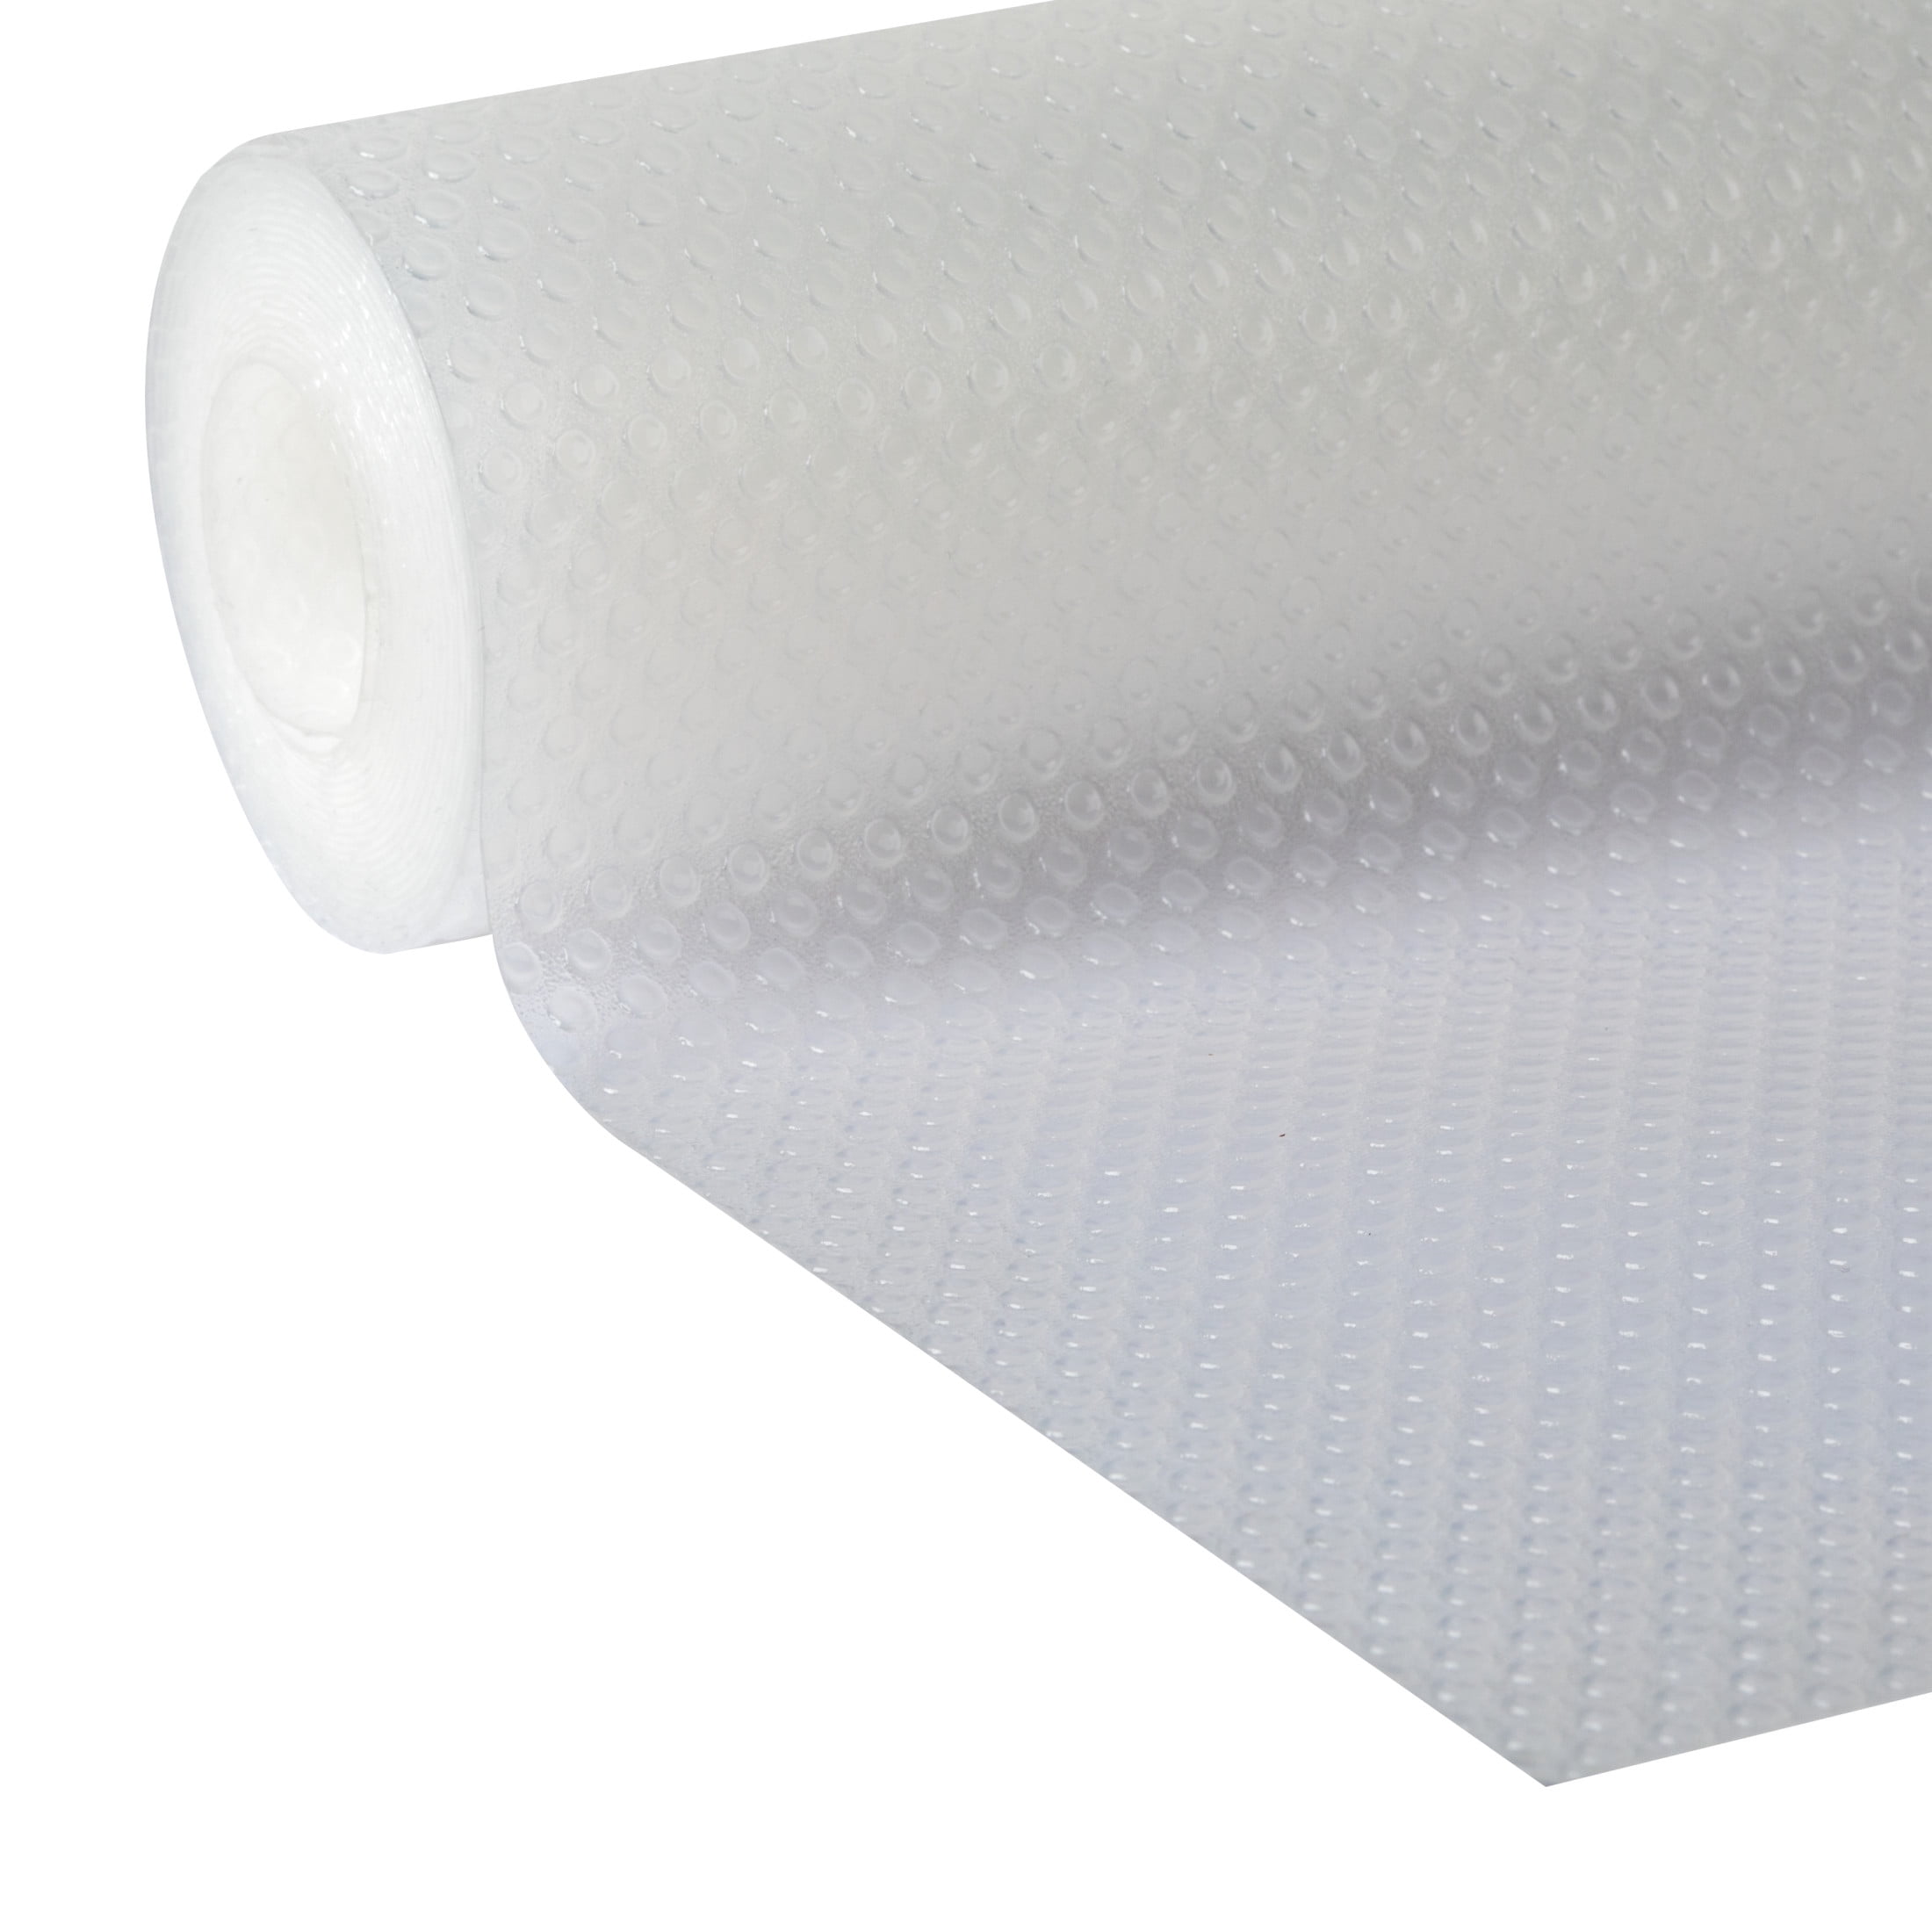 Clear Shelf Liners for Kitchen Cabinets 11.8 Inches x 10 Feet